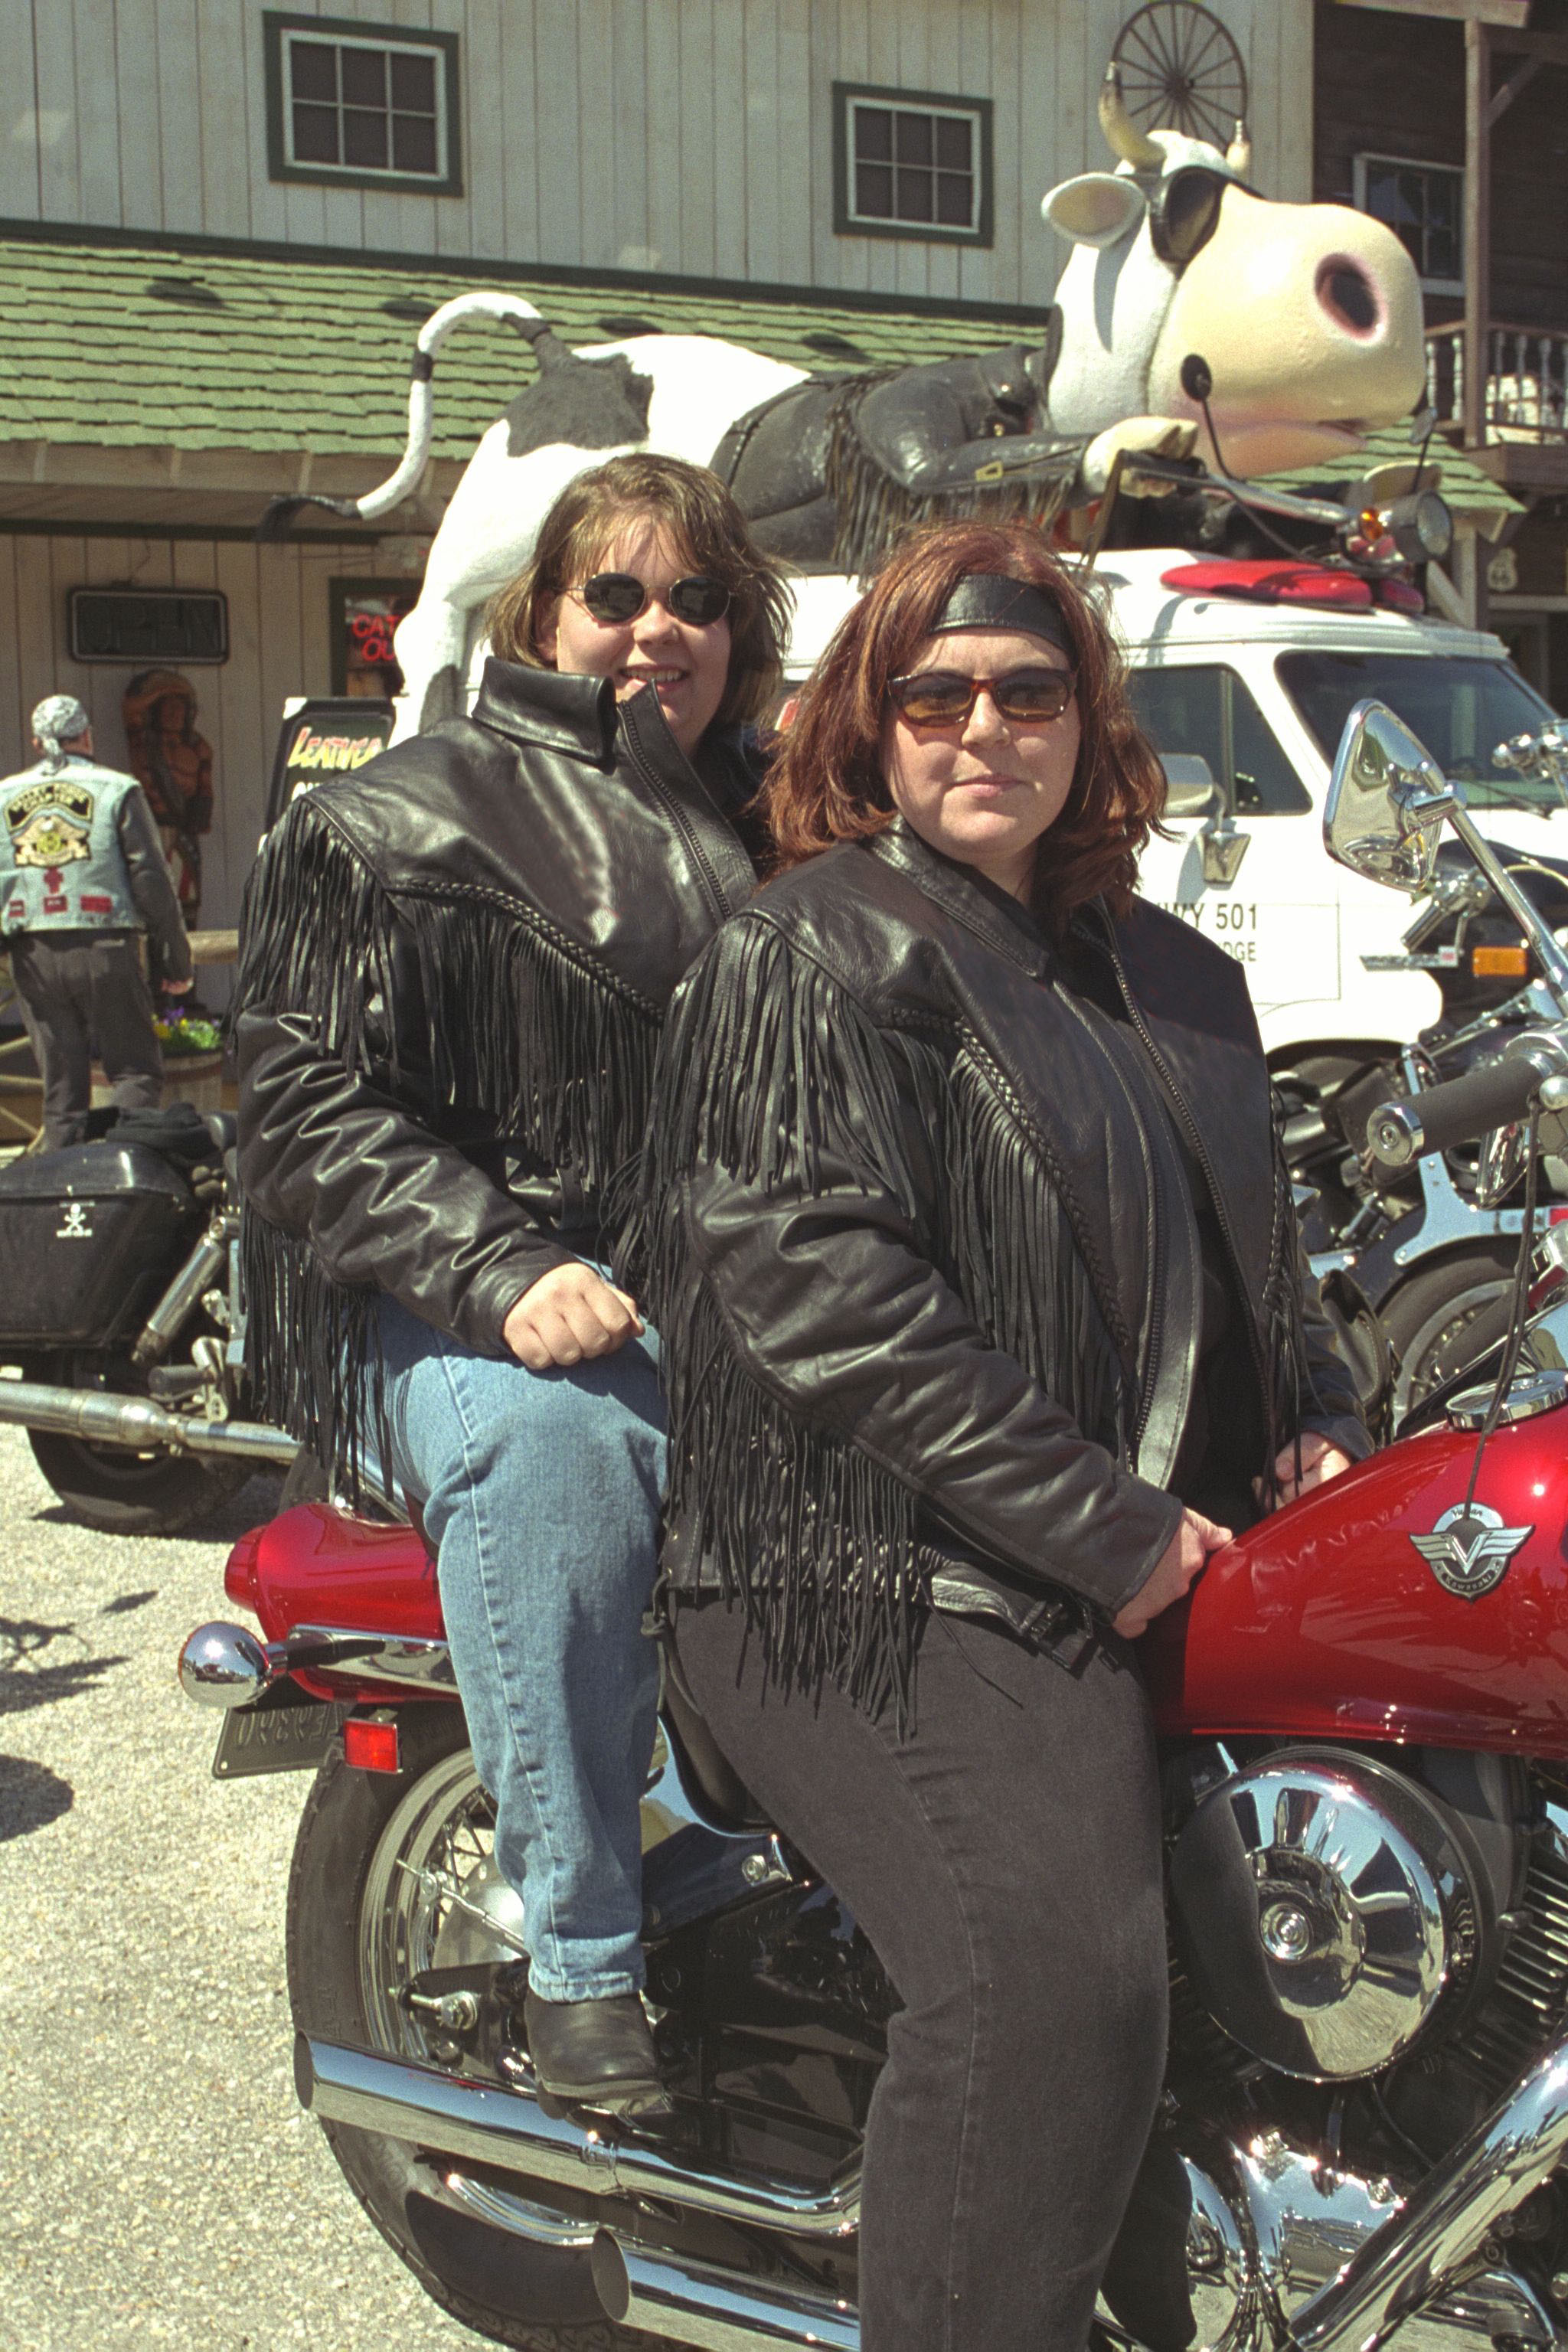 lady riders wearing plus sized leather jackets with fringes